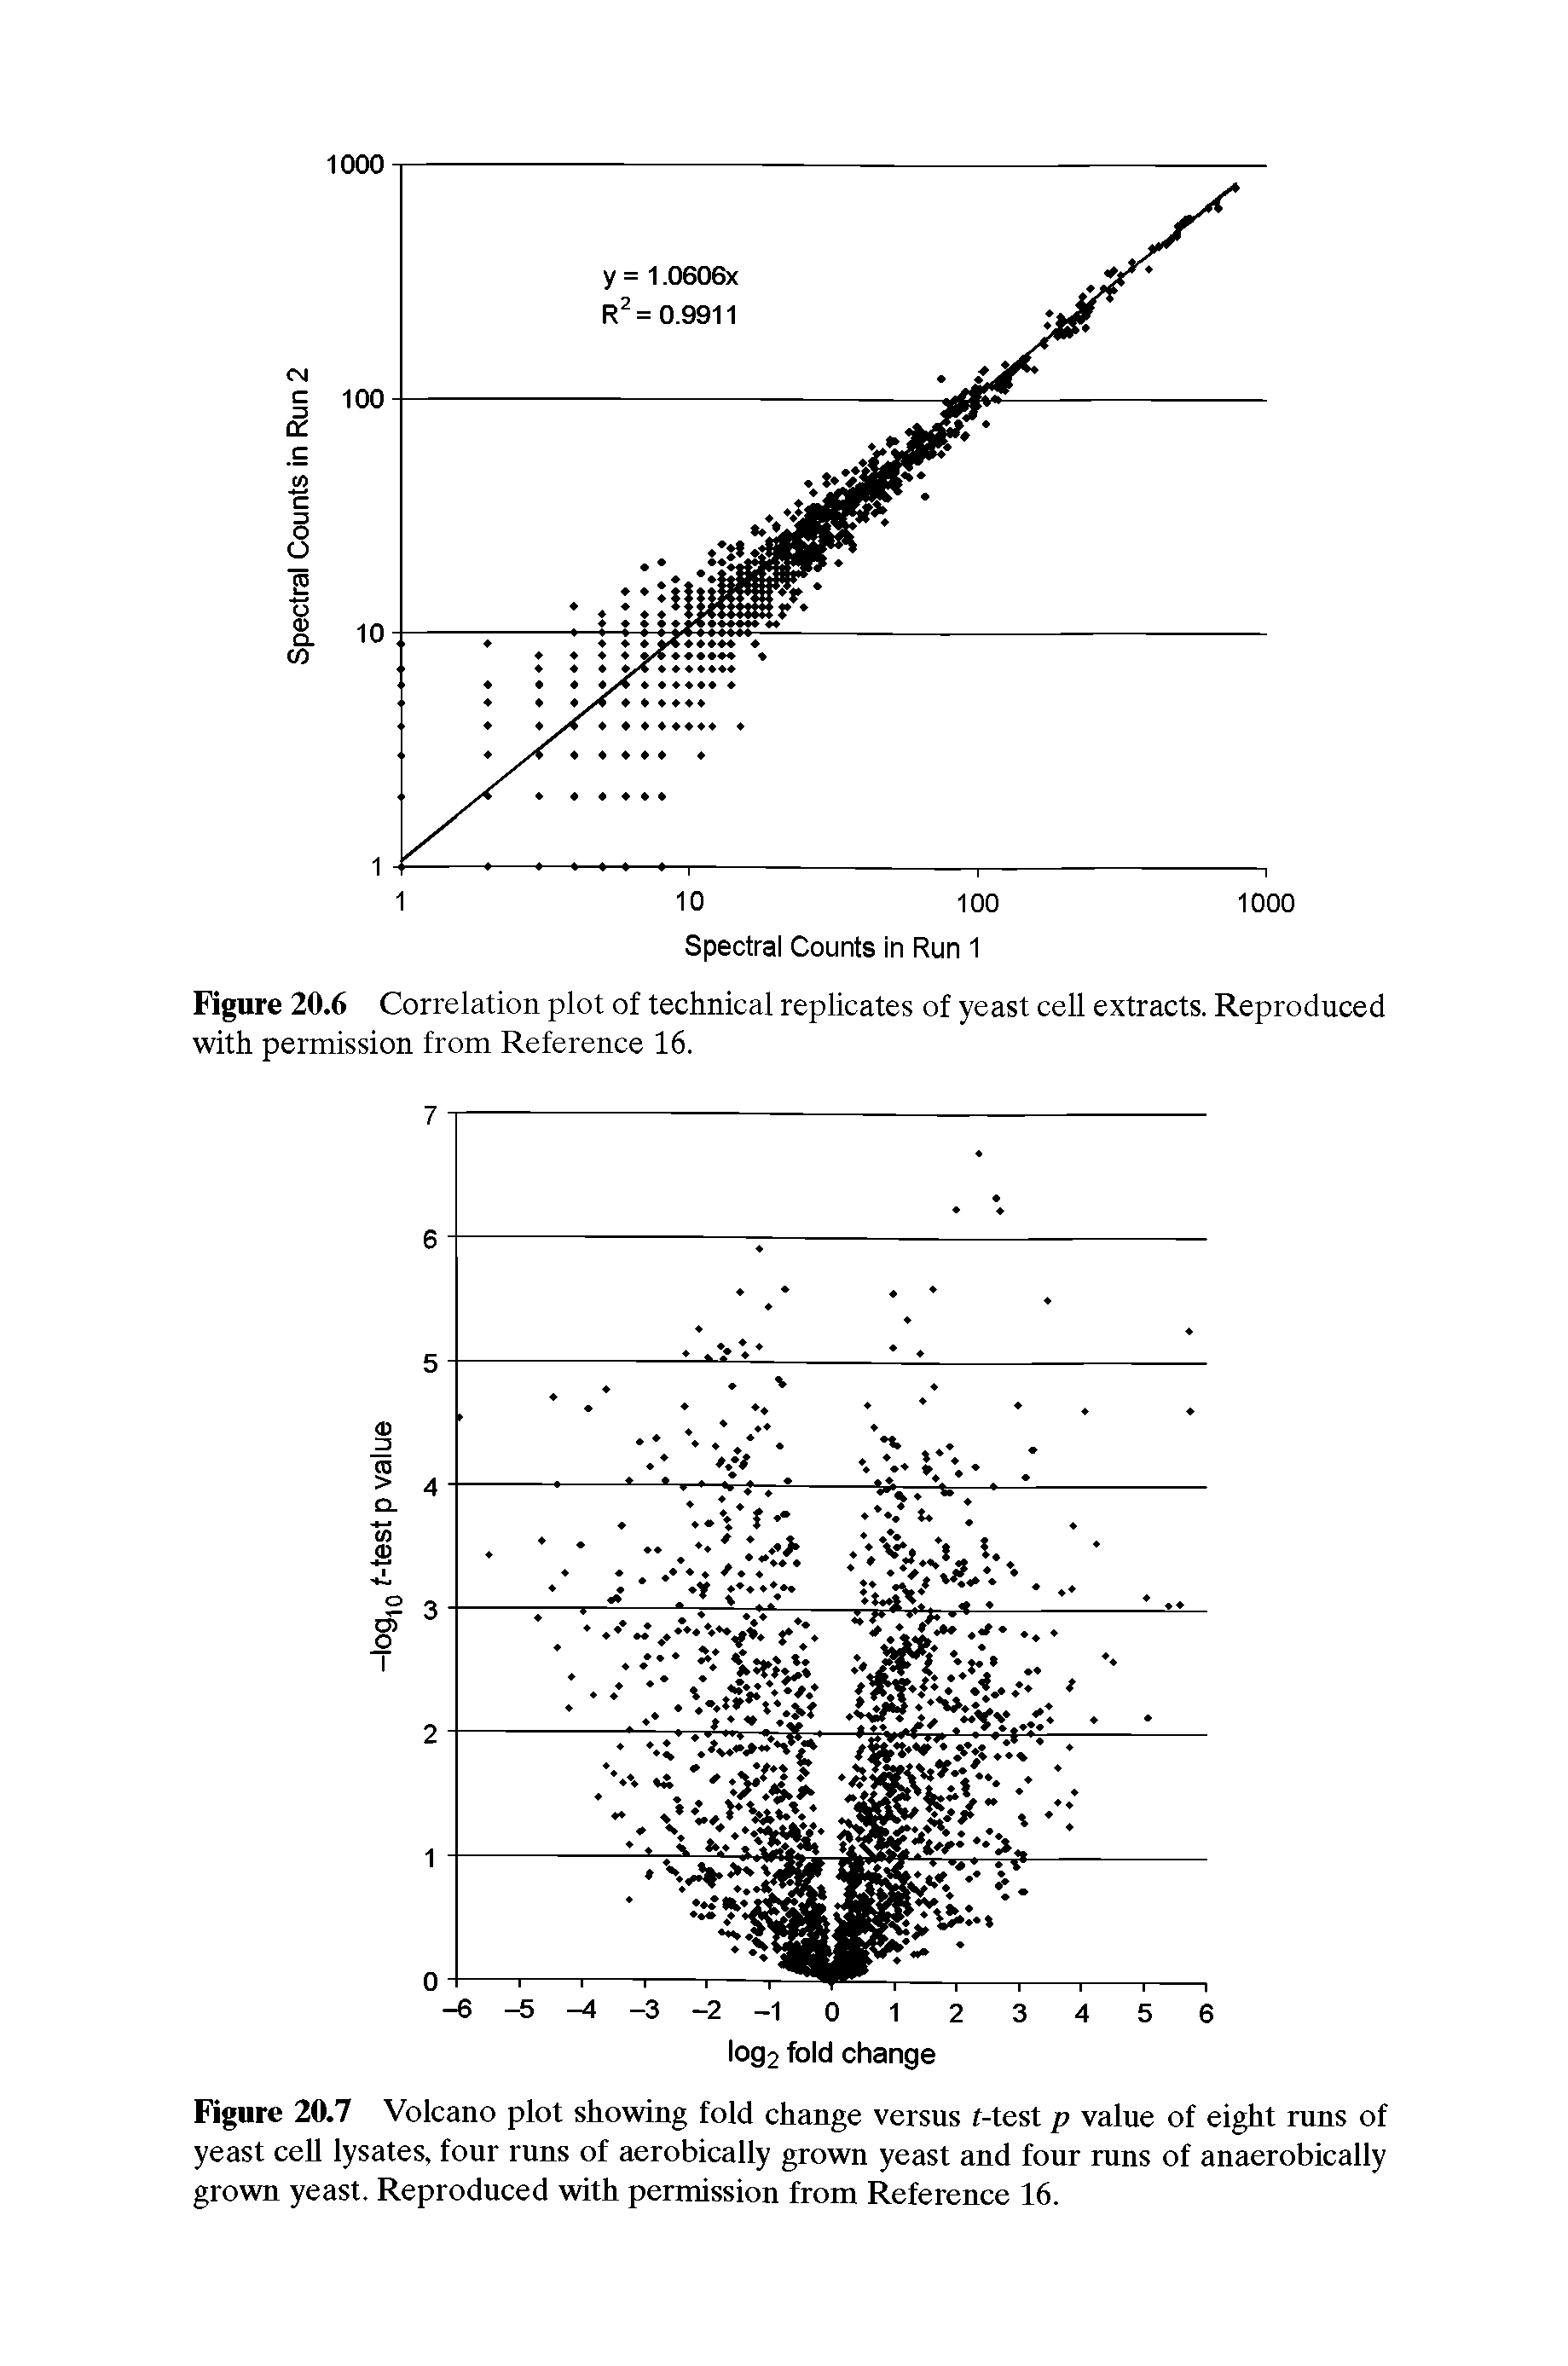 Figure 20.7 Volcano plot showing fold change versus f-test p value of eight runs of yeast cell lysates, four runs of aerobically grown yeast and four runs of anaerobically grown yeast. Reproduced with permission from Reference 16.